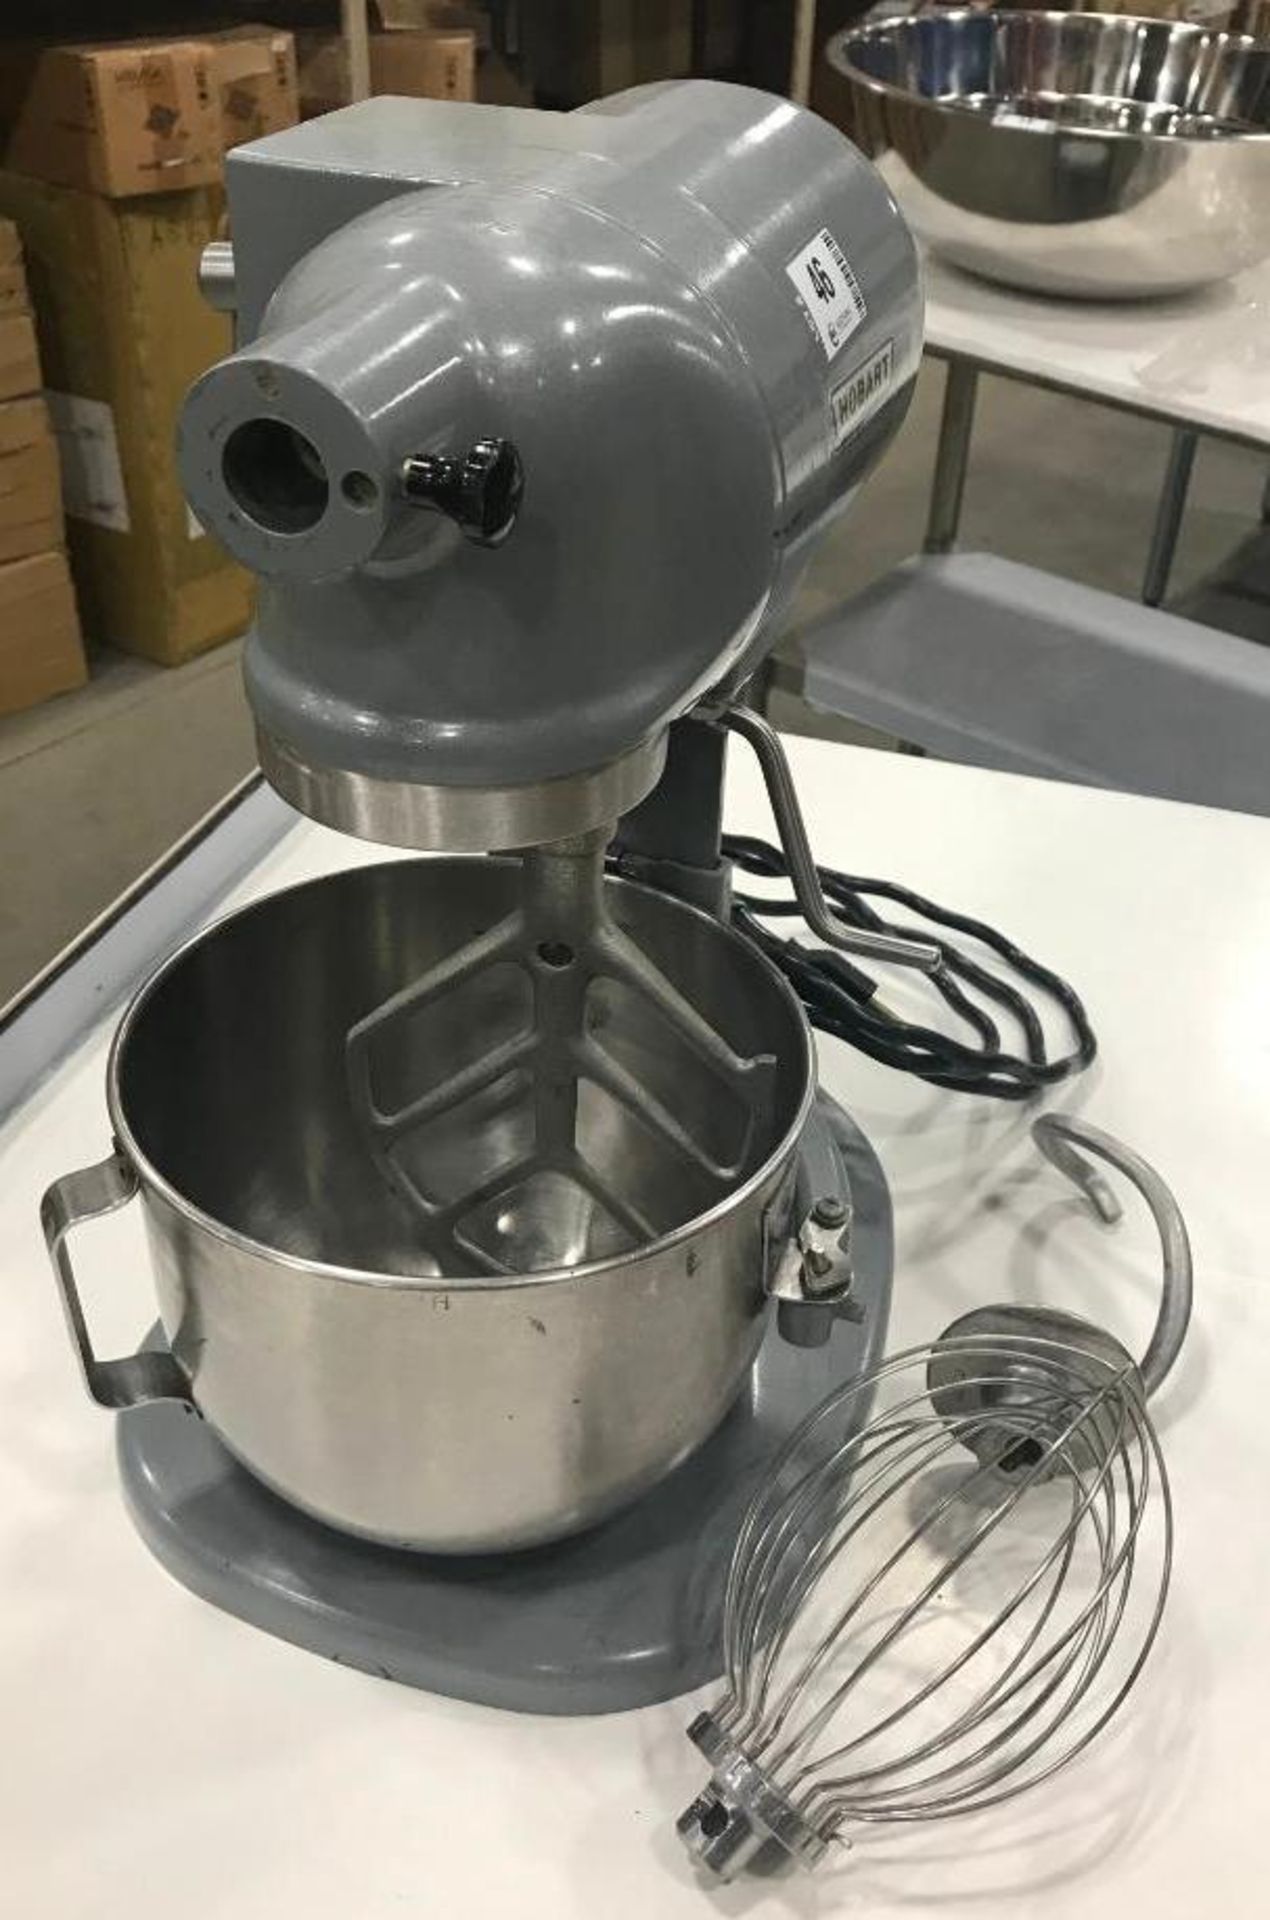 HOBART N50 5QT MIXER WITH HOOK, WHIP, PADDLE - Image 6 of 9